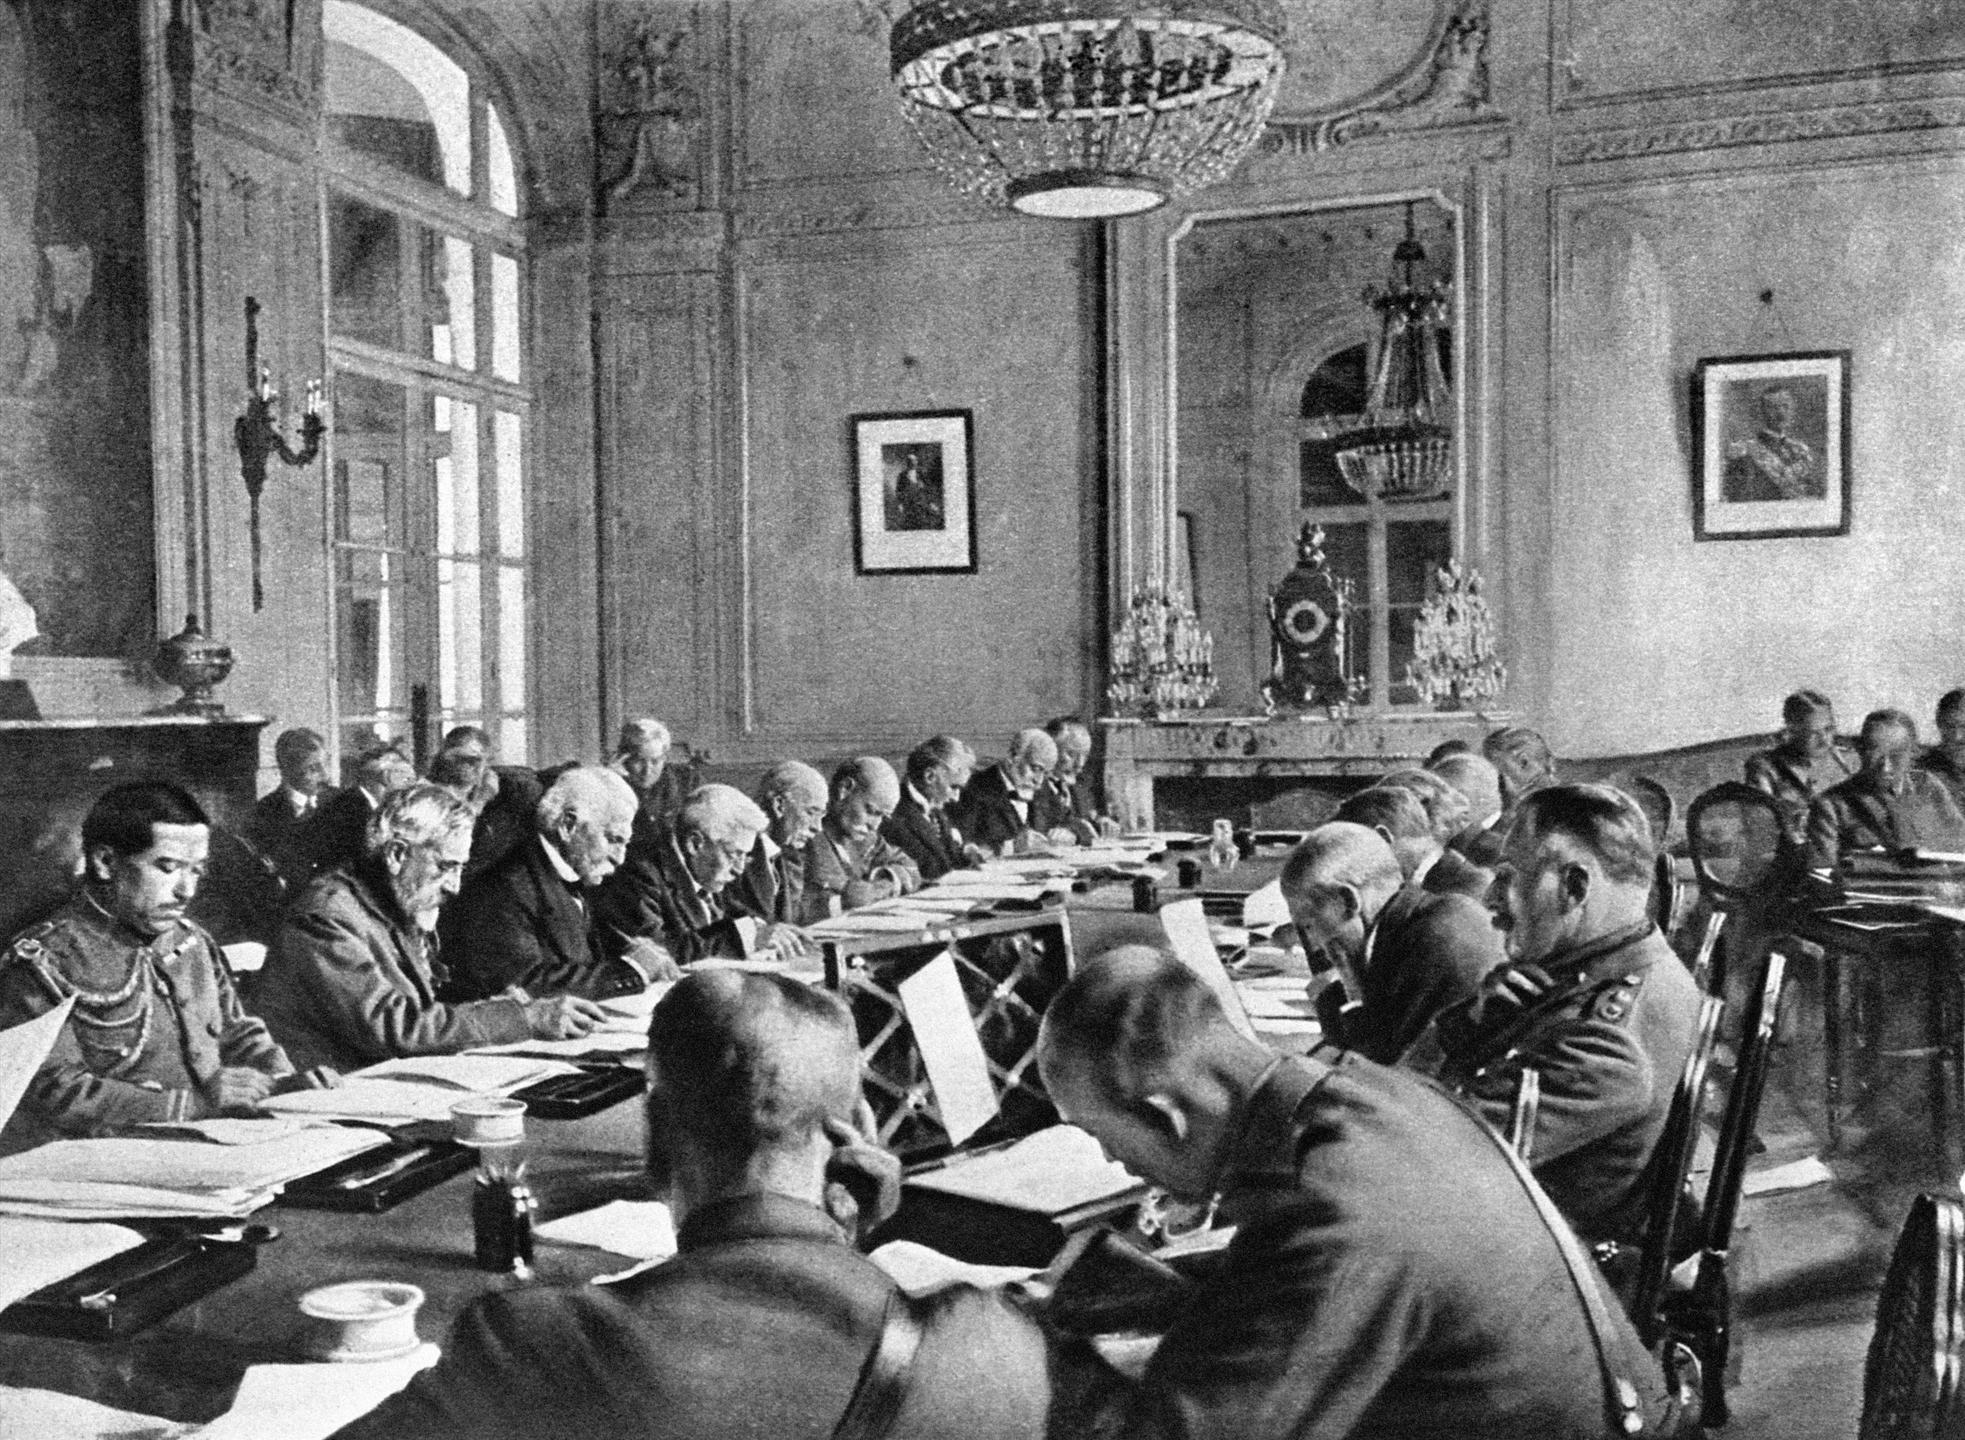 The signing of the Treaty of Versailles